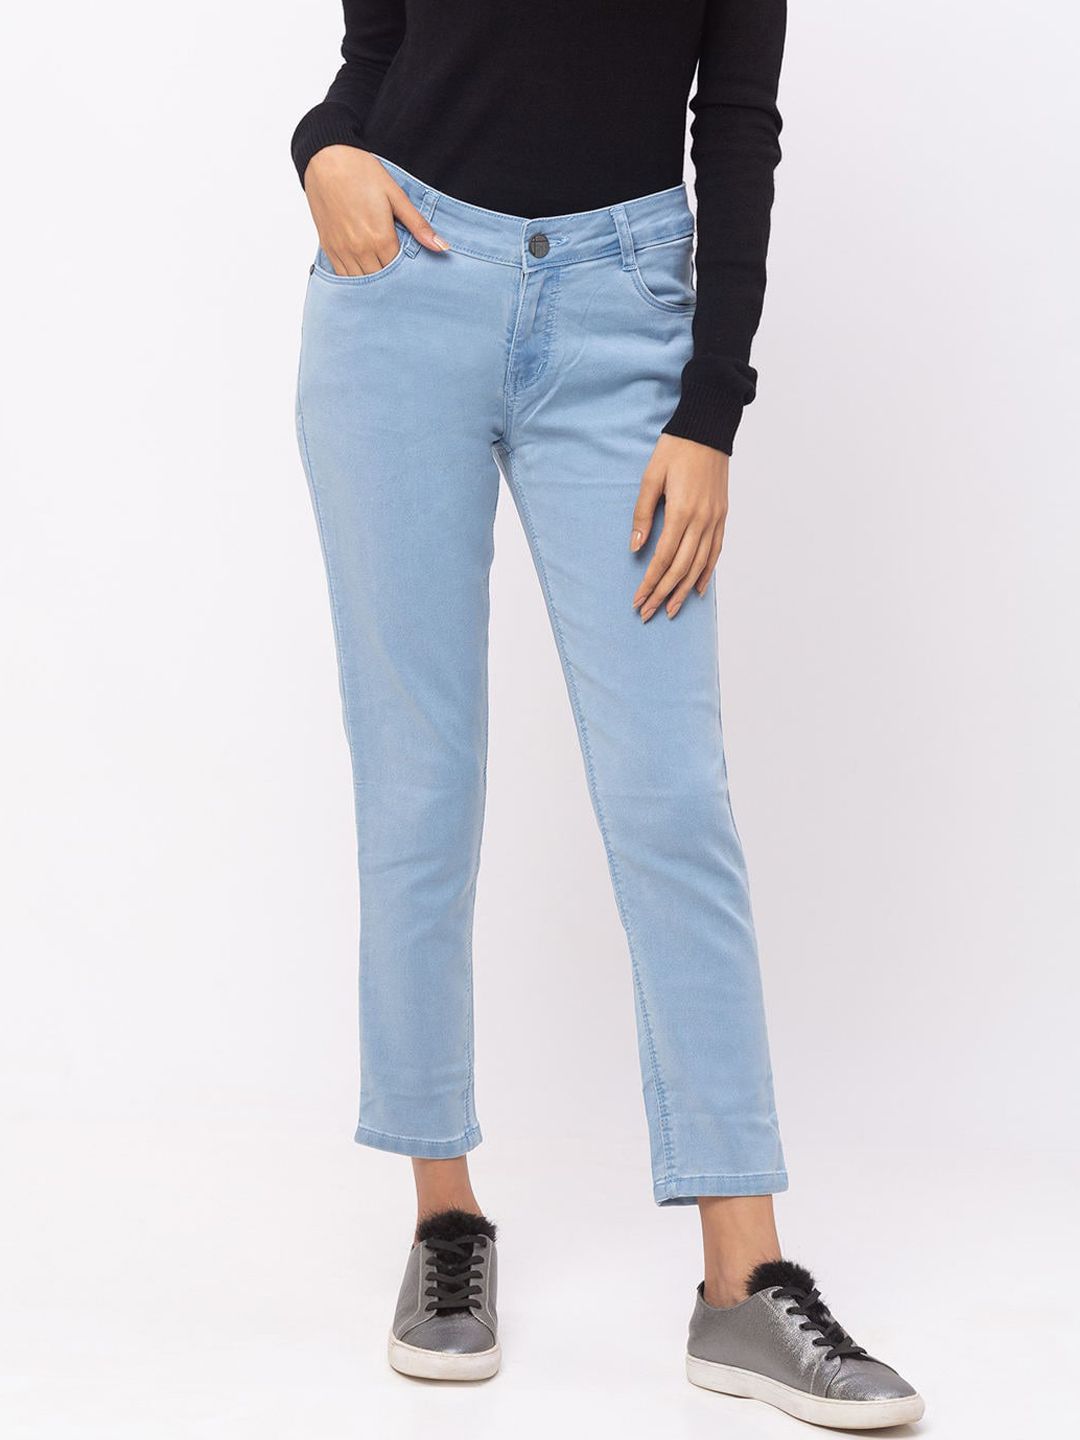 ZOLA Women Ice Blue Clean Look Slim Fit  Jeans Price in India